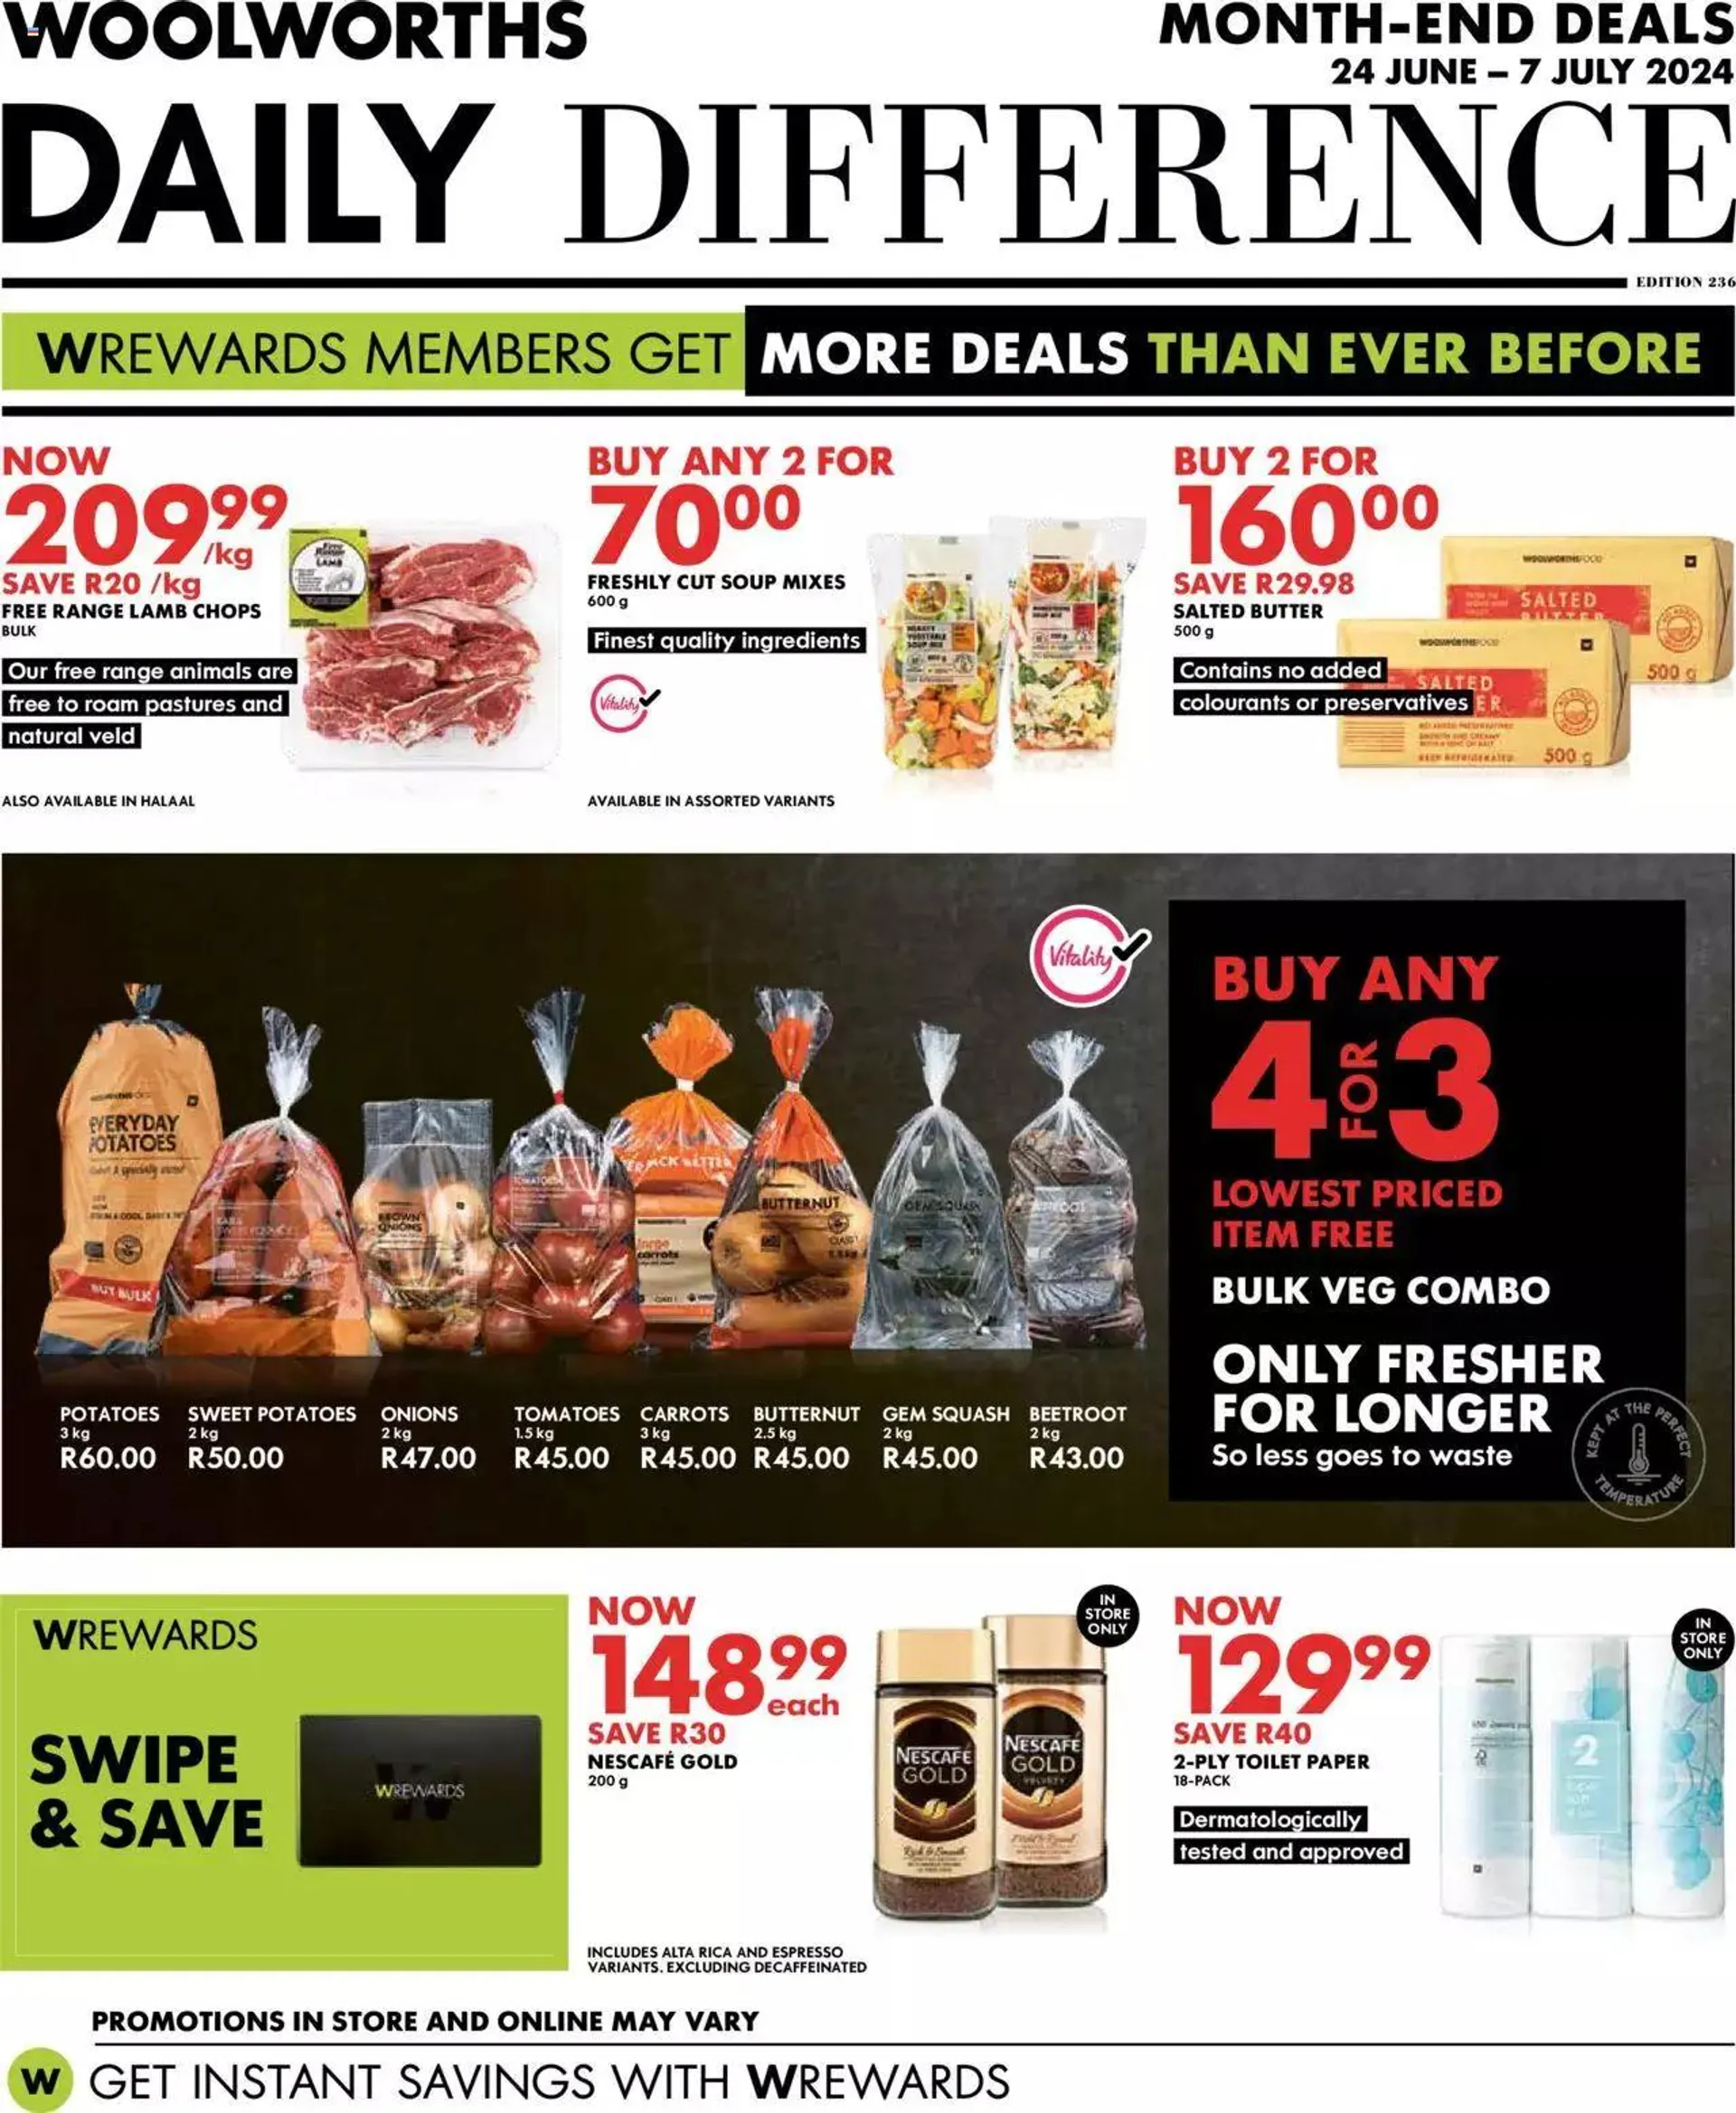 Woolworths Daily Difference - Western Cape - 0